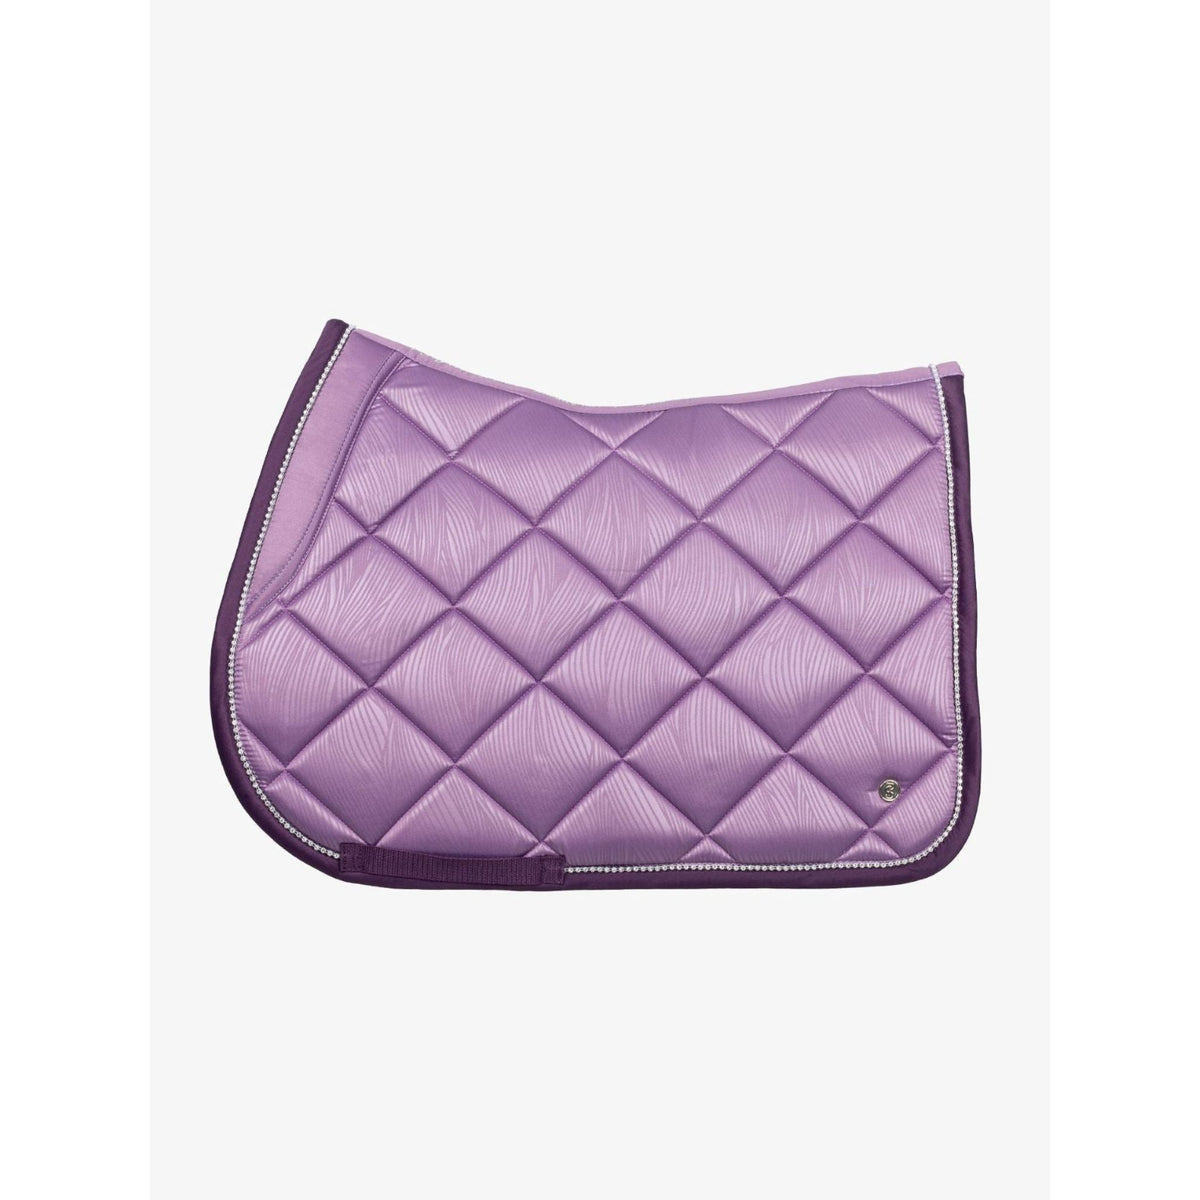 Purple saddle pad with subtle wave pattern and diamante border.